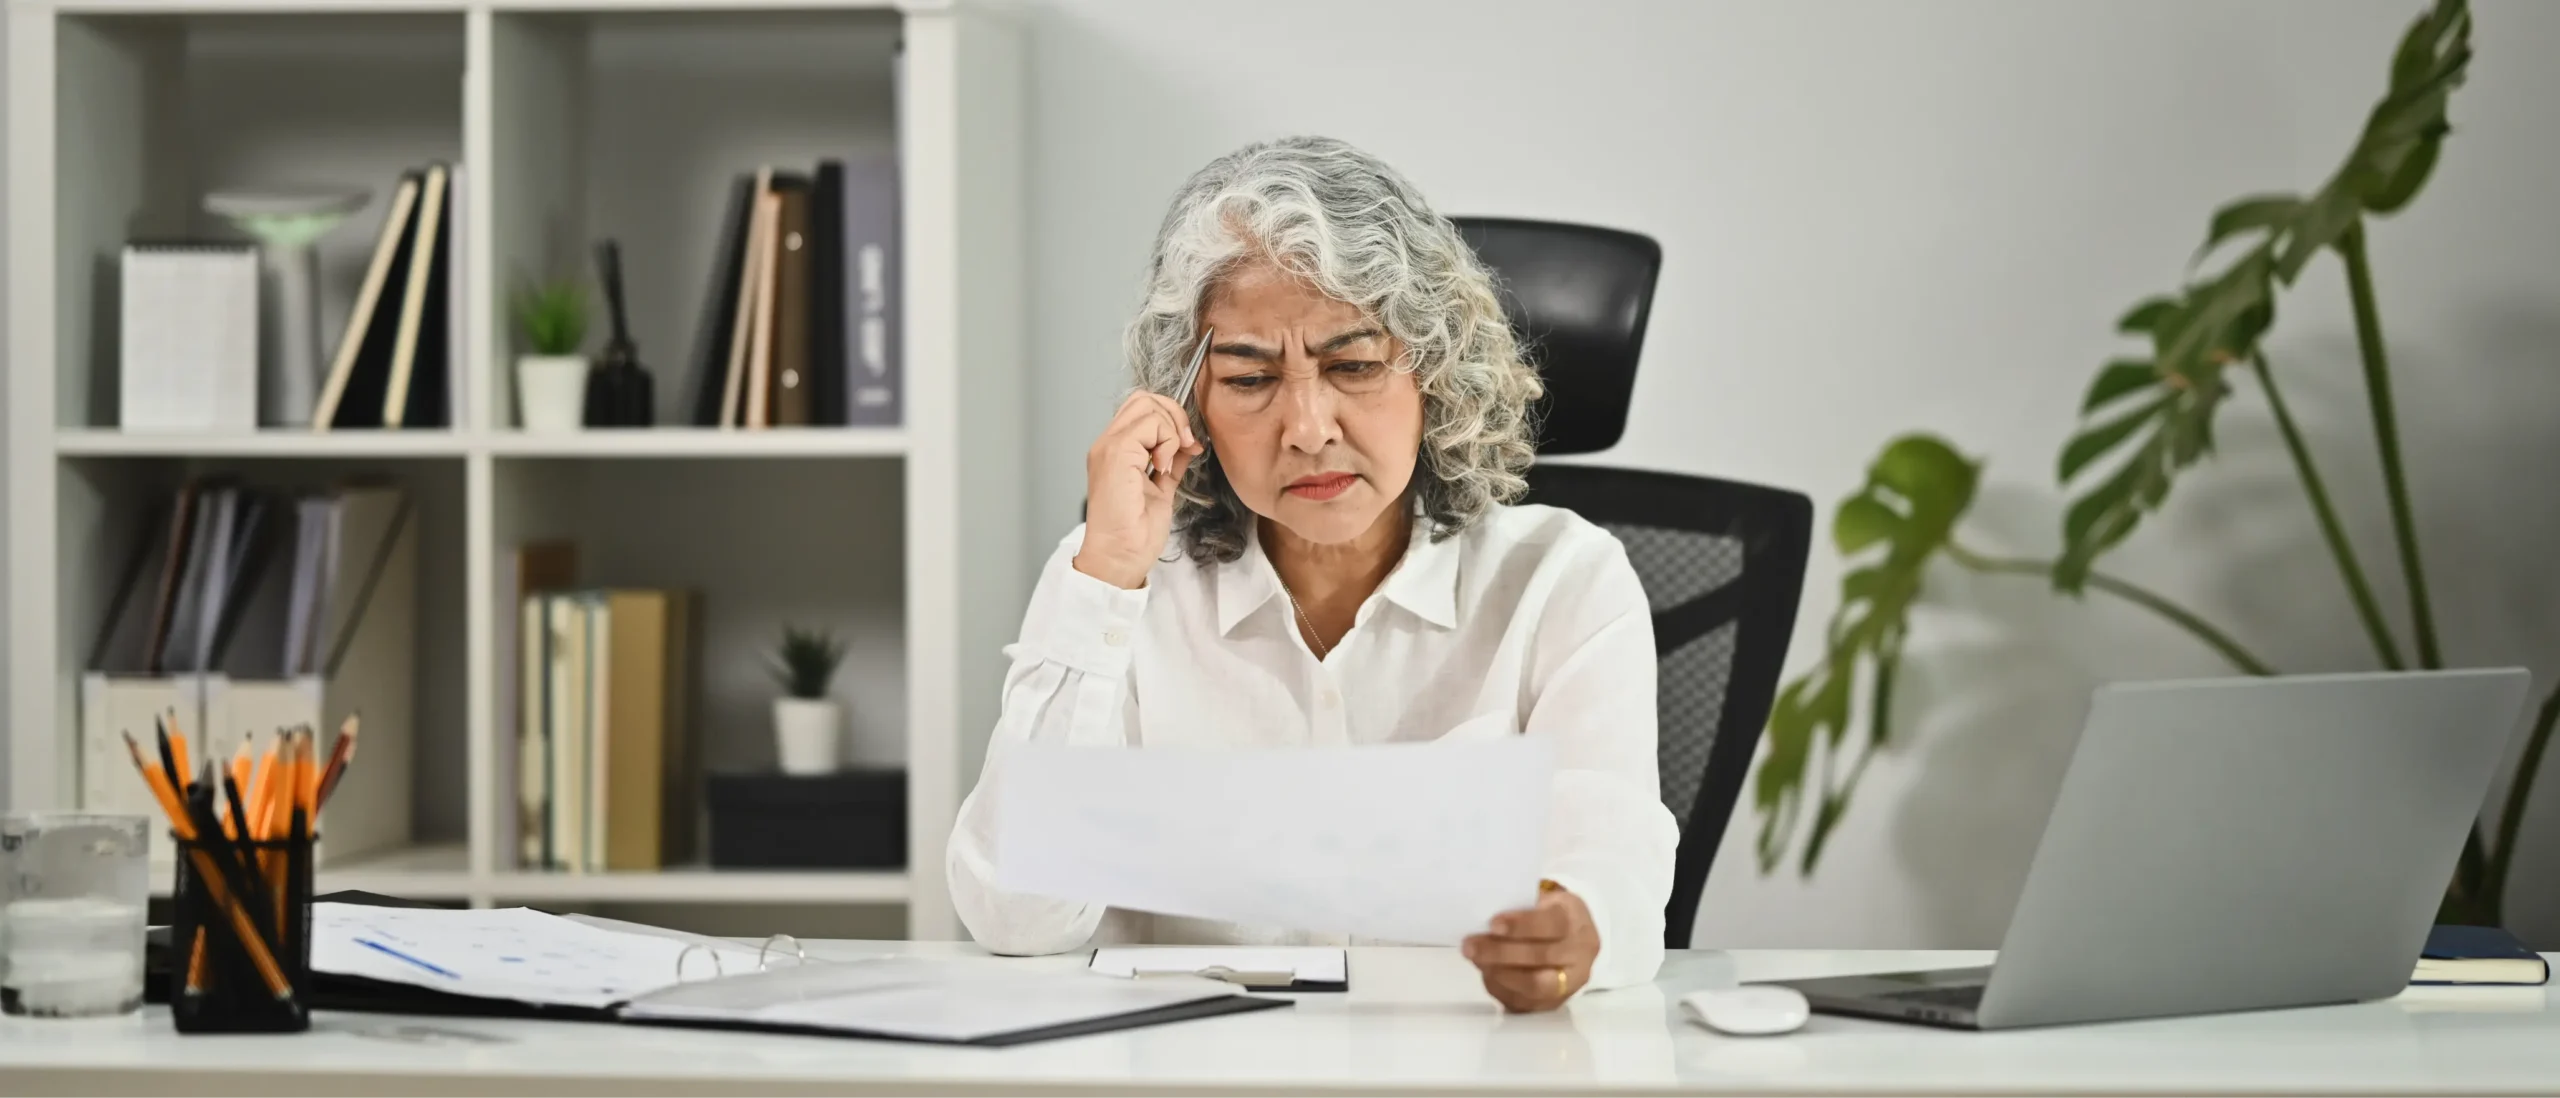 Menopause woman stressed at work